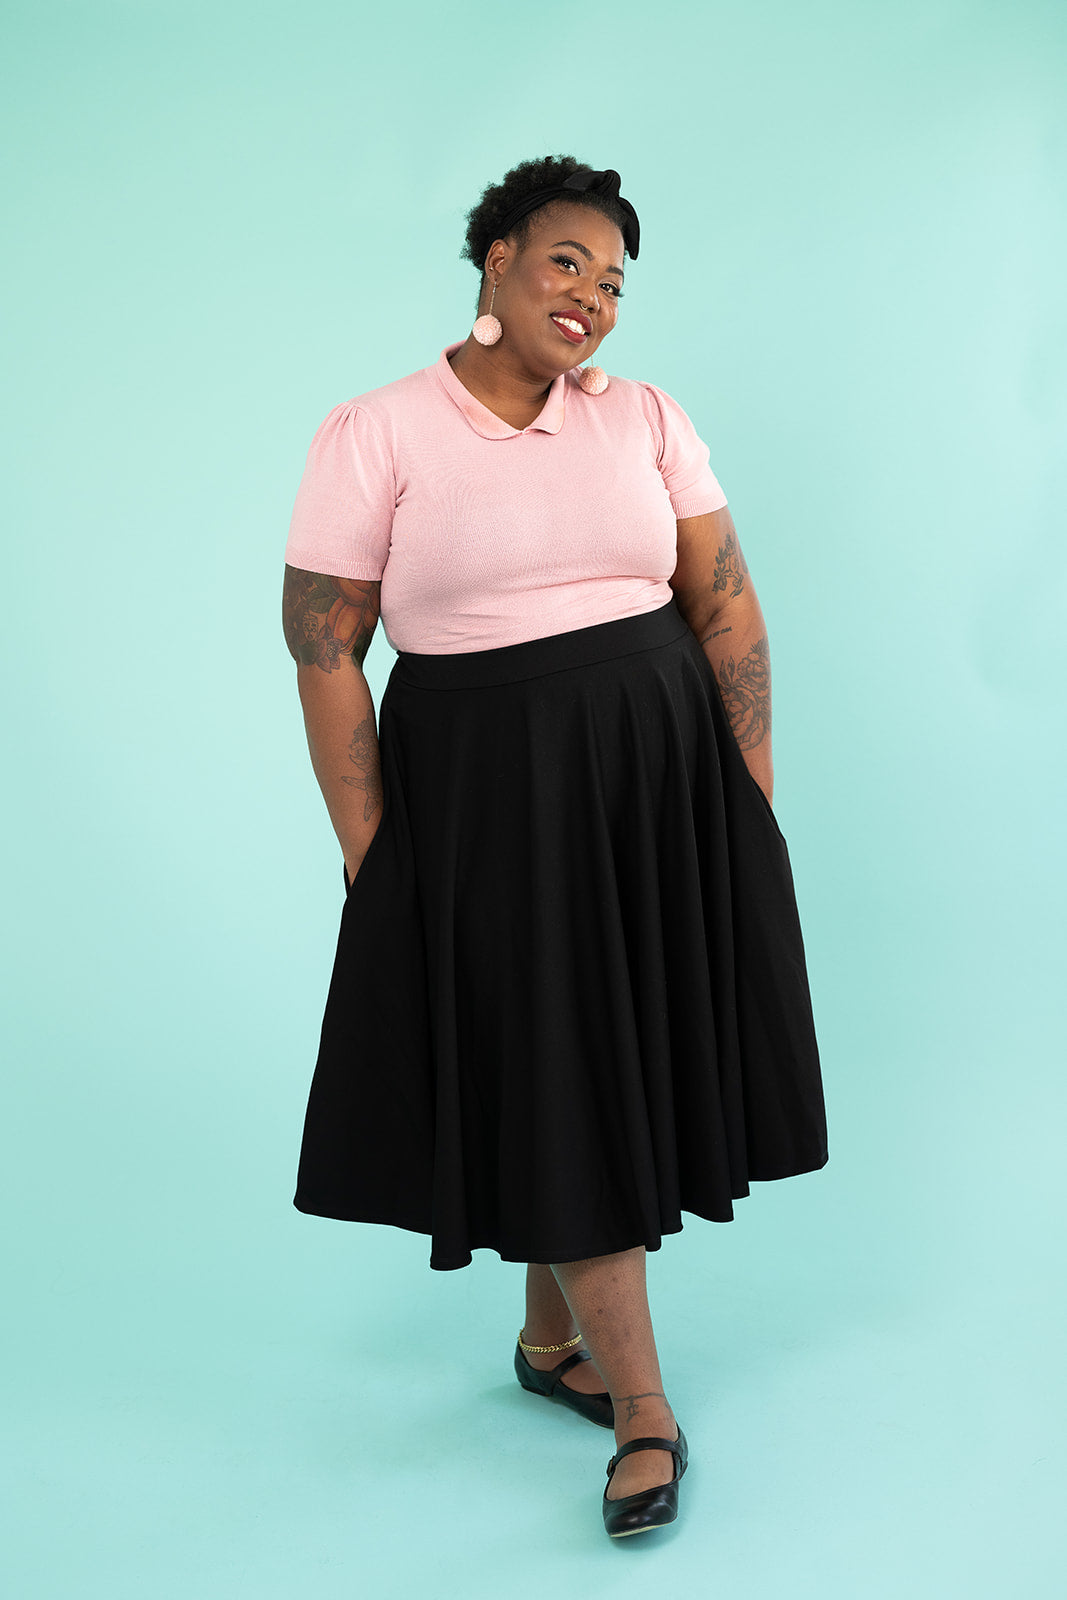 A black woman is looking at the camera and smiling. She is wearing a pink top and pompom earrings and a black skirt.